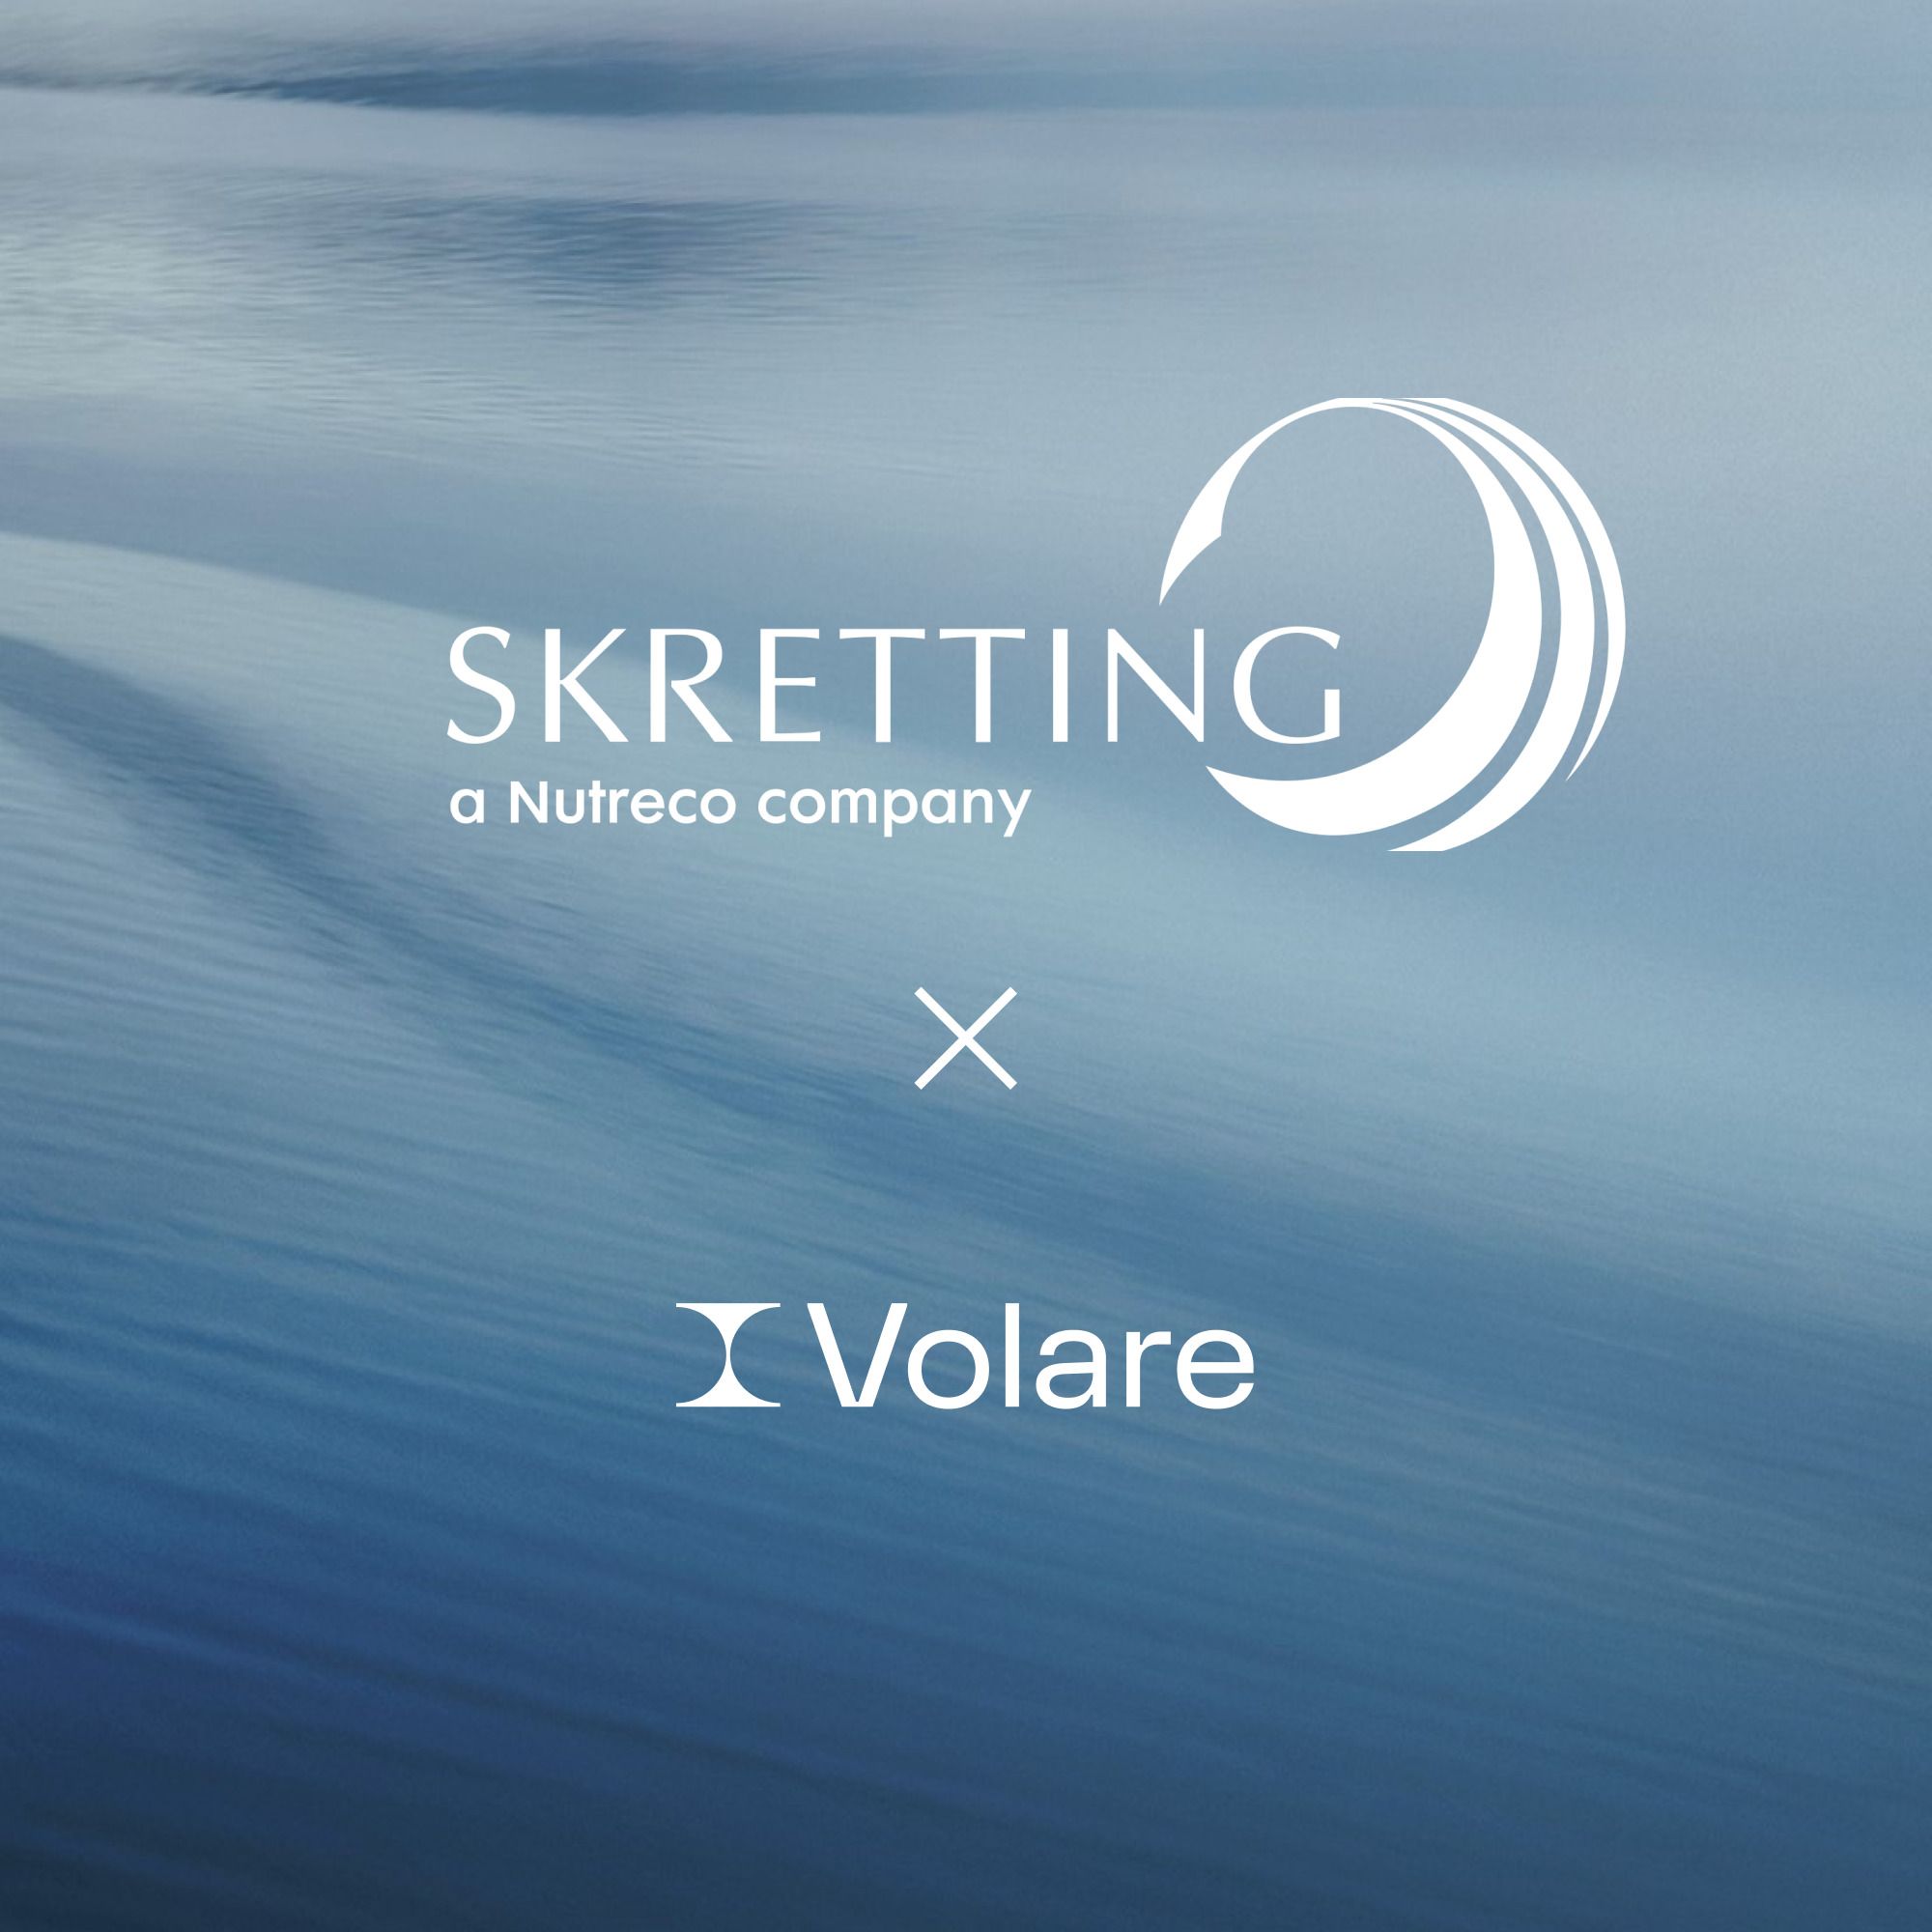 Volare and Skretting collaboration